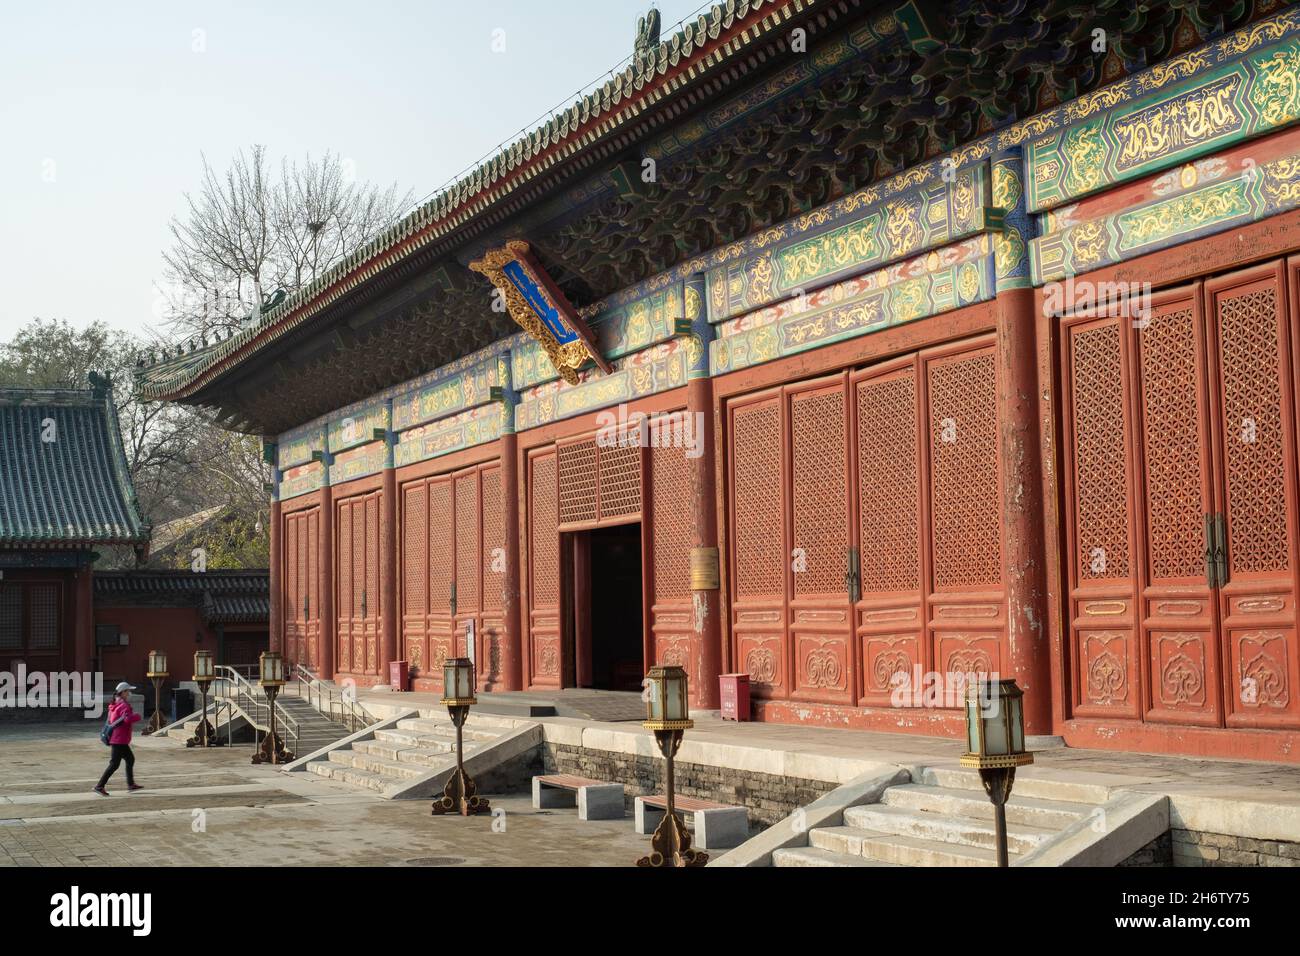 Taisui (Jupiter) Hall Complex in Xiannongtan (Temple of Agriculture) in Beijing, China. Stock Photo